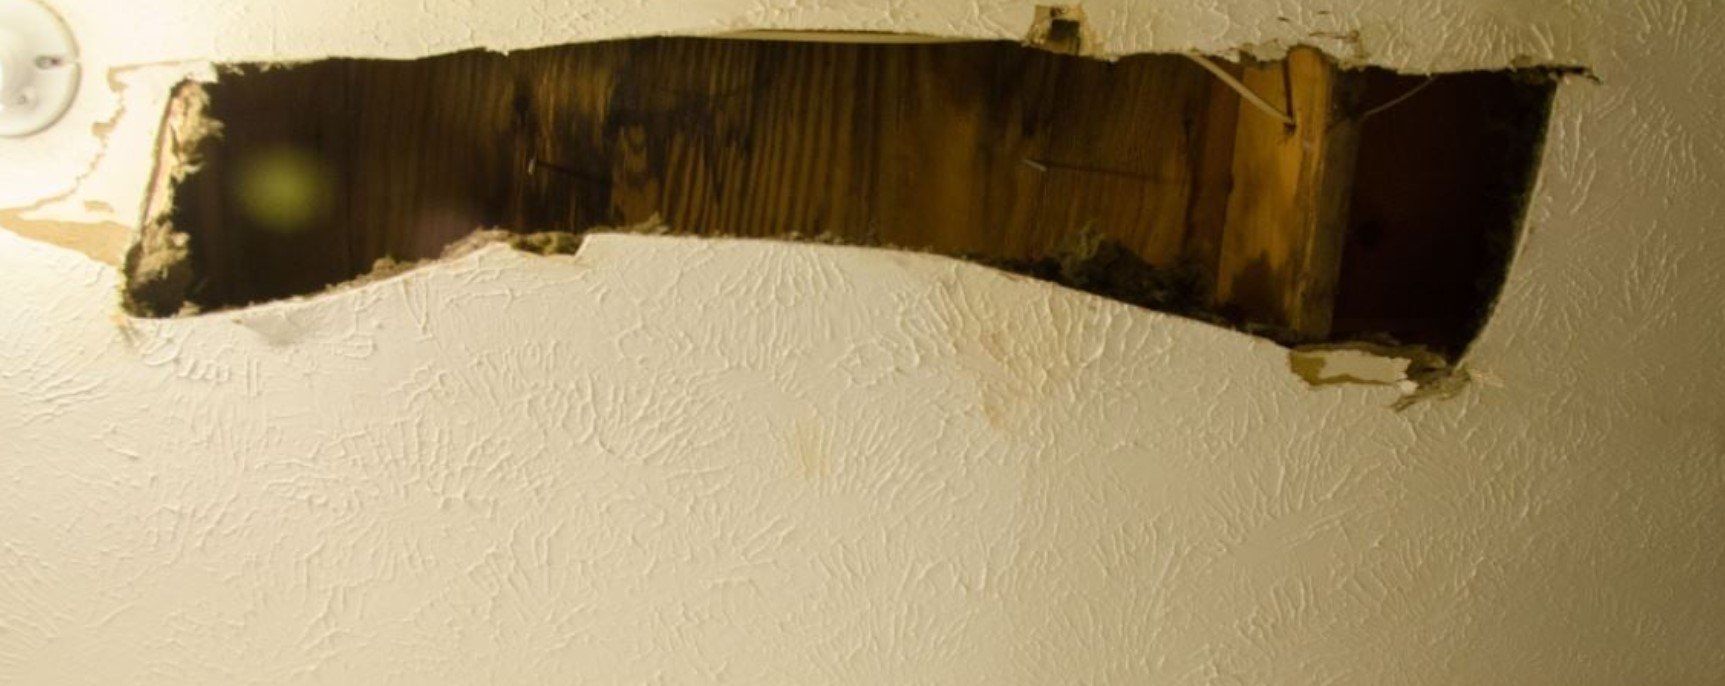 Fix Drywall Hole — Lincoln, NE — Patch Pros